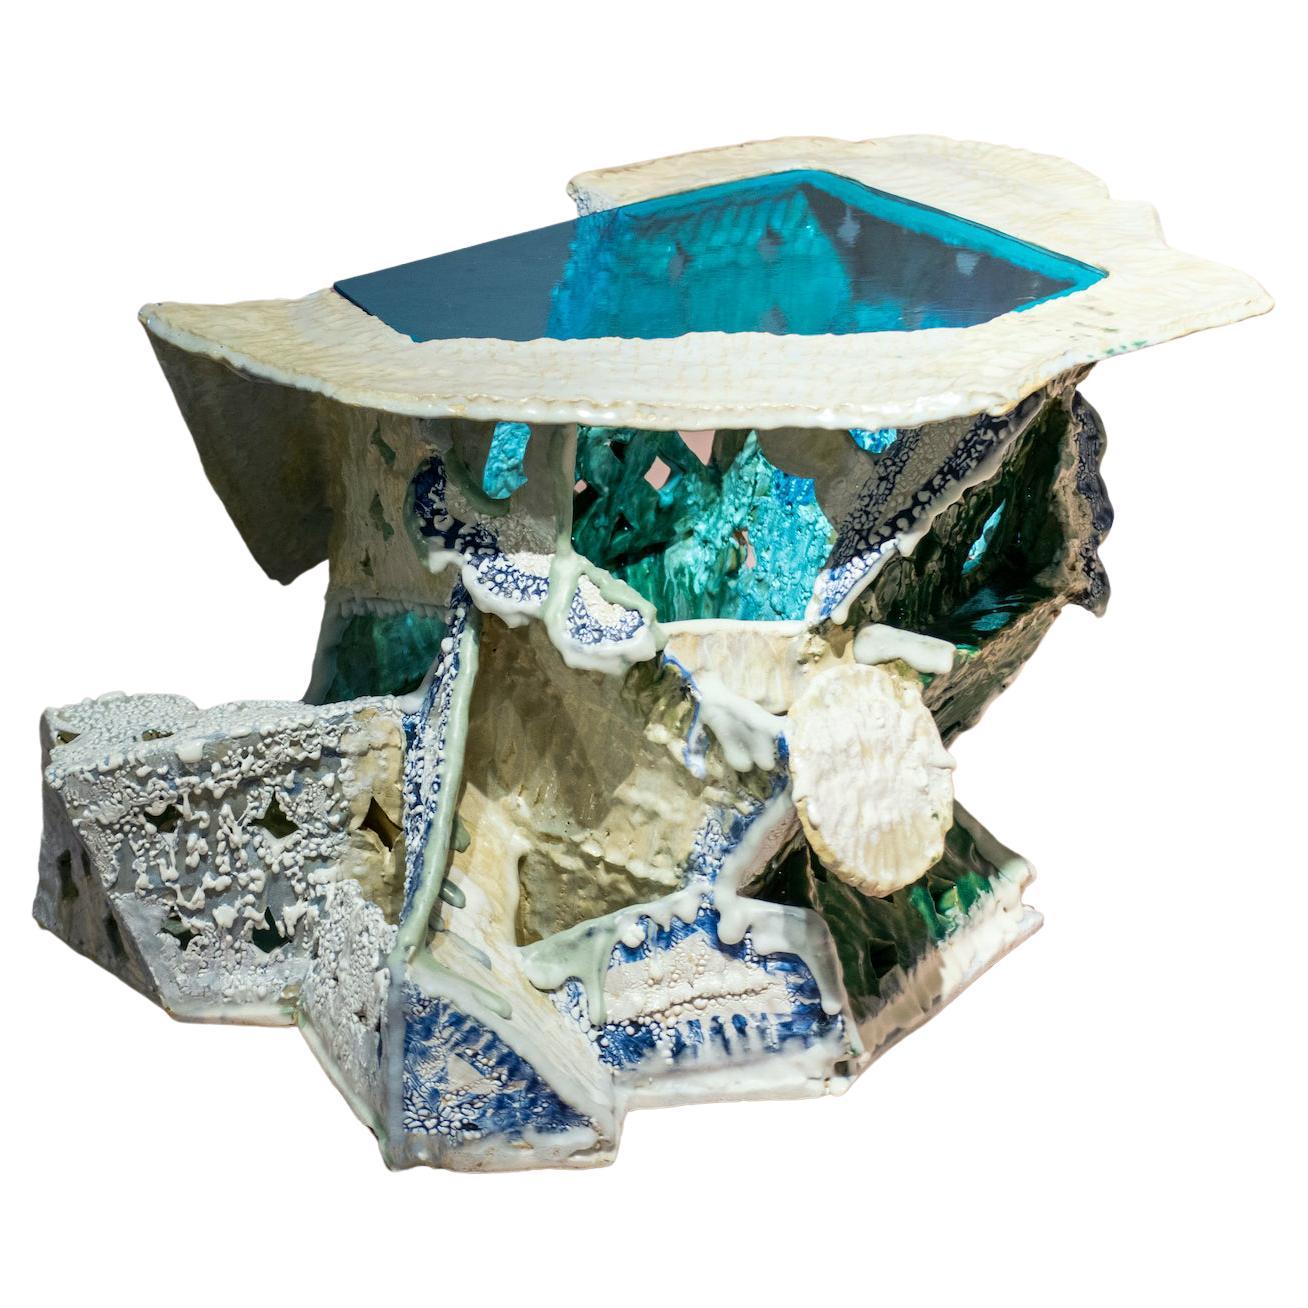 Contemporary "Blue Glass Side Table" by YehRim Lee Organic Ceramic